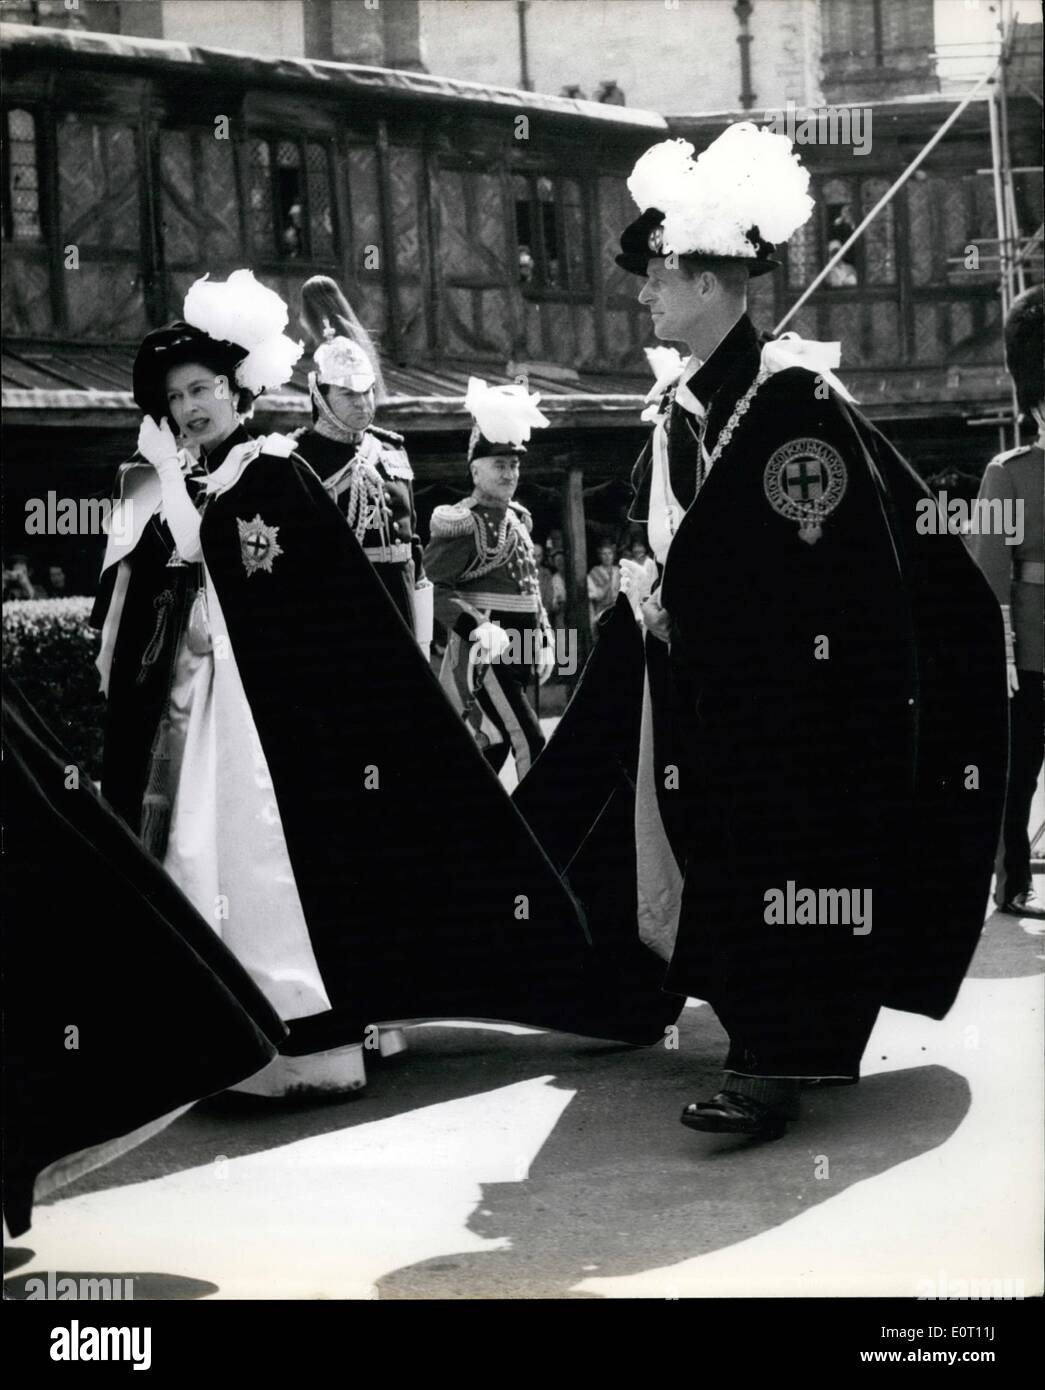 Jun. 06, 1960 - Ceremony of the Garter - at Windsor. Queen holds on to her hat.: H. M. the Queen officiated at the ceremony of the Garter at Windsor this afternoon - when four new Knights Commander were initiated. They were field marshal Sir William Slim; Duke of Northumberland; Earl of Radnor and Lord Digby. Photo shows H. M. the Queen holds her Hat in the breeze - as she arrived at the West Door with the Duke of Edinburgh - for the ceremonies. Stock Photo